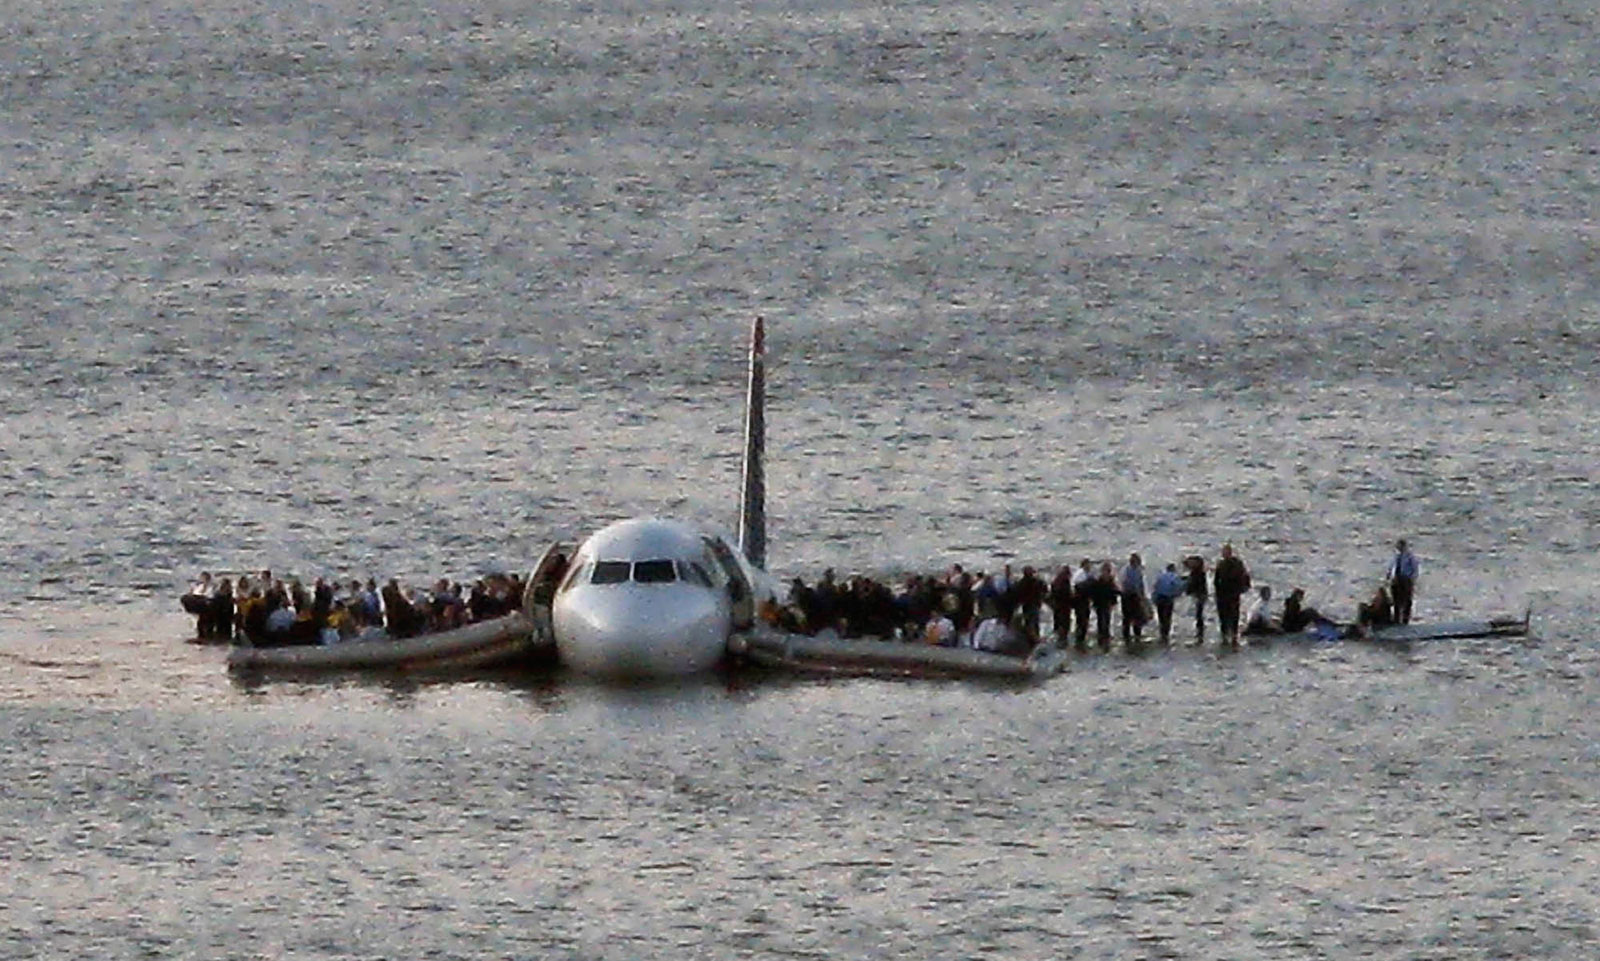 US Airways Flight 1549 floats on the Hudson river after crash landing, miraculously, everyone survived. 2009